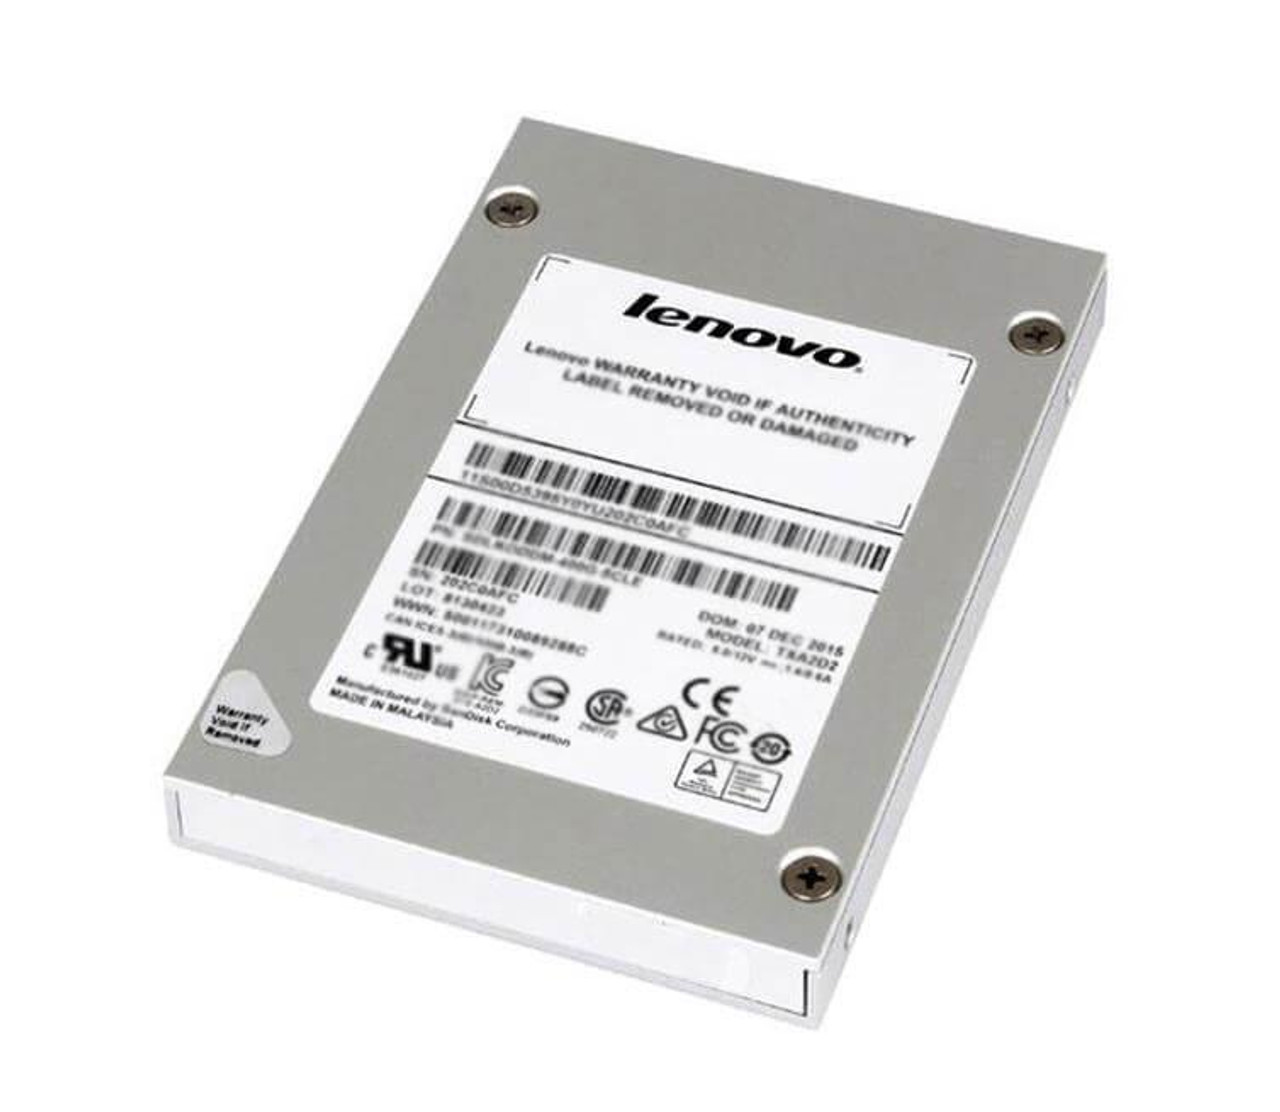 Lenovo 1645a 6.4TB MS SAS HS 3.5-Inch Internal Solid State Drive (SSD)